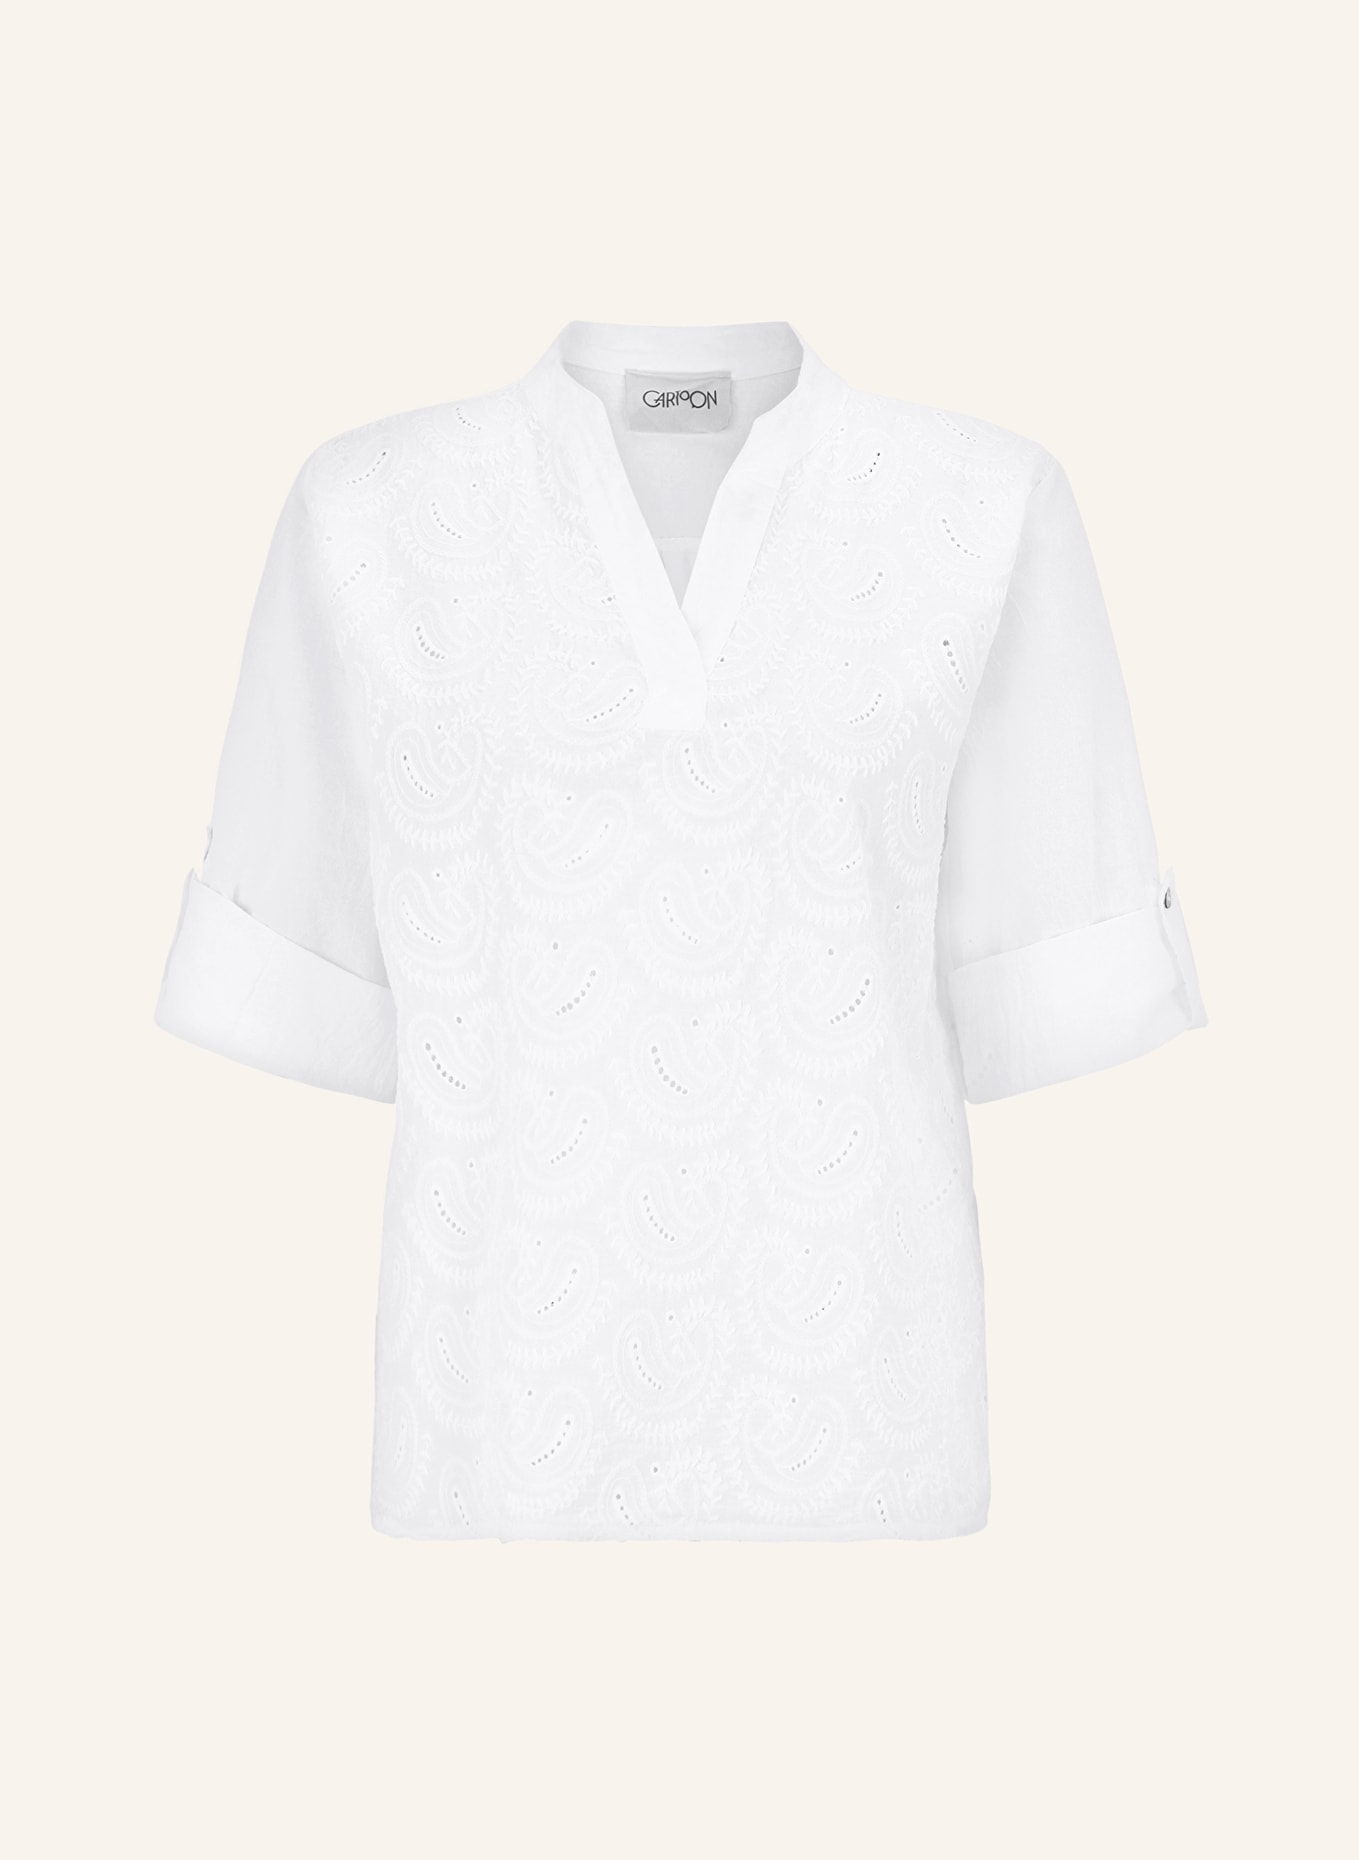 CARTOON Shirt blouse with 3/4 sleeves and broderie anglaise, Color: WHITE (Image 1)